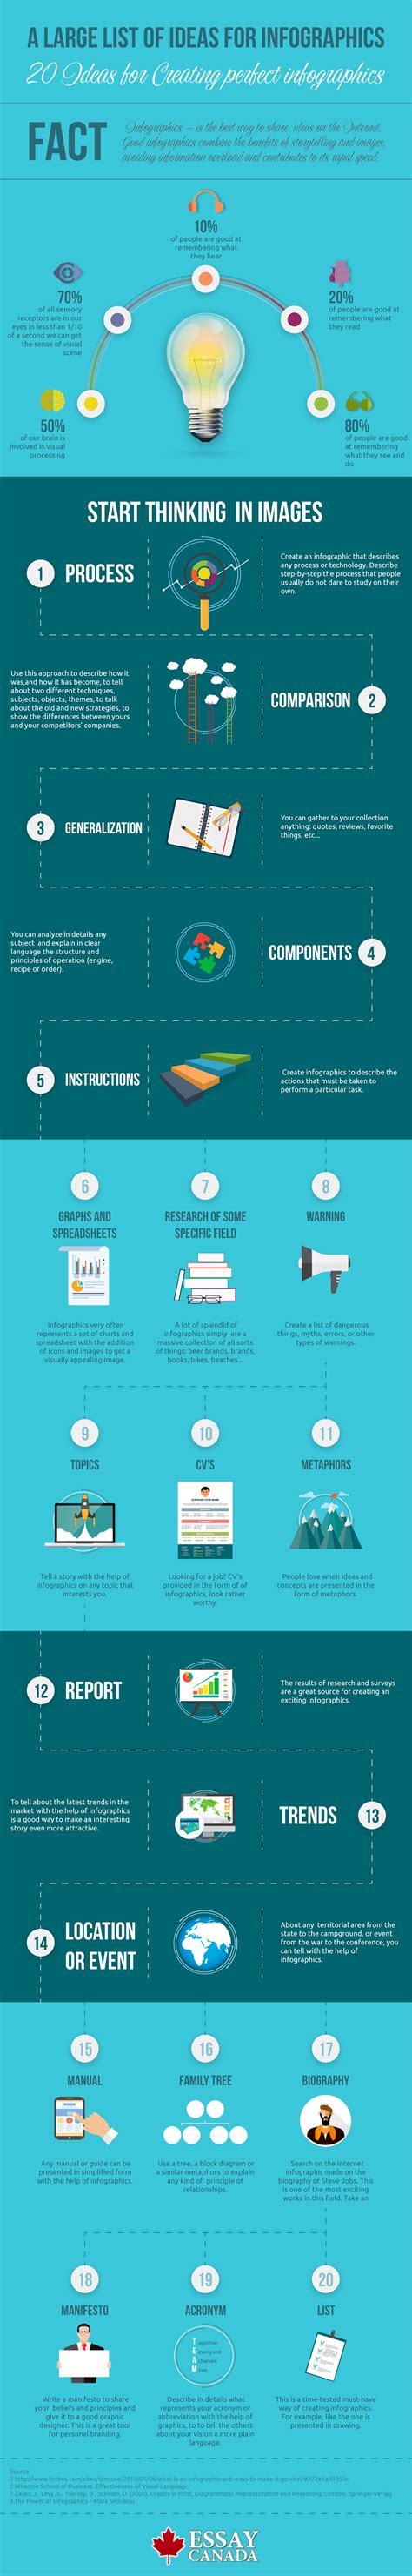 20 Ideas for Creating Perfect Infographics Infographic - e-Learning ...